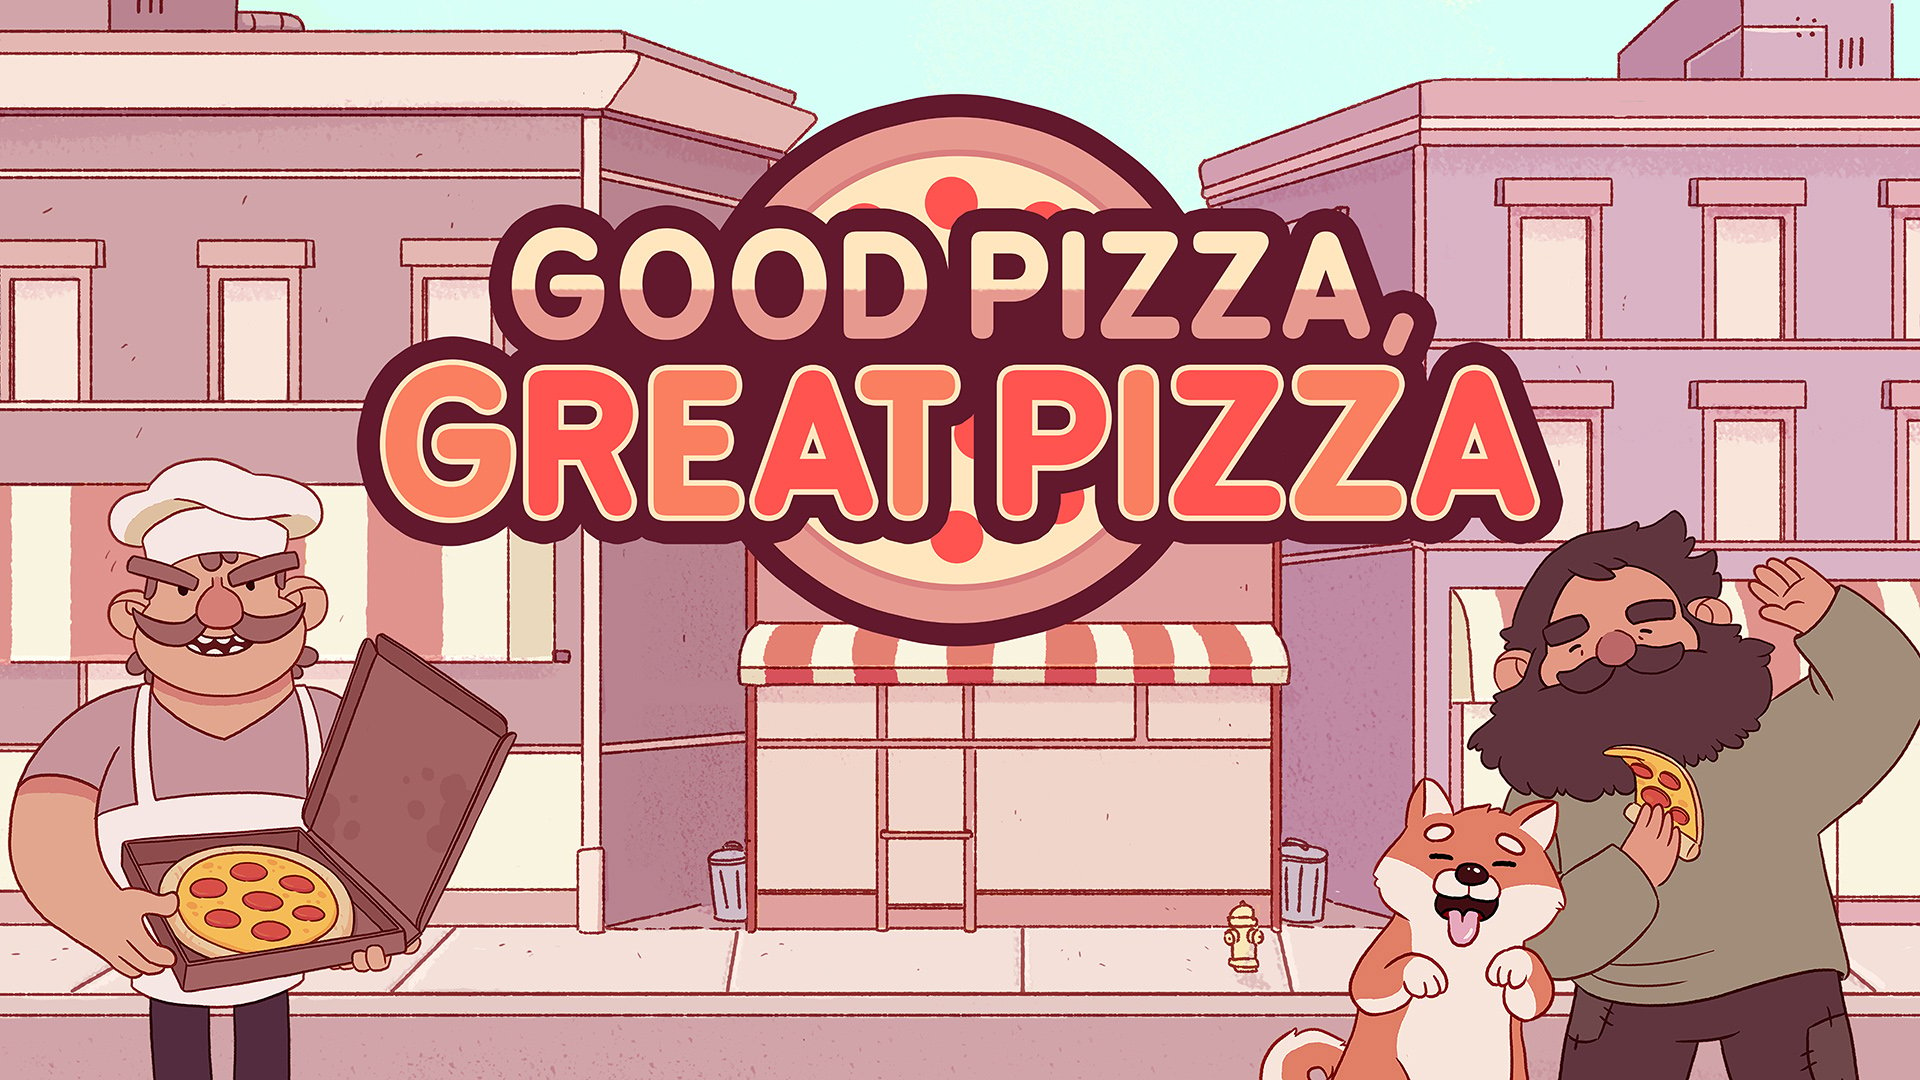 Good Pizza Great Pizza poster